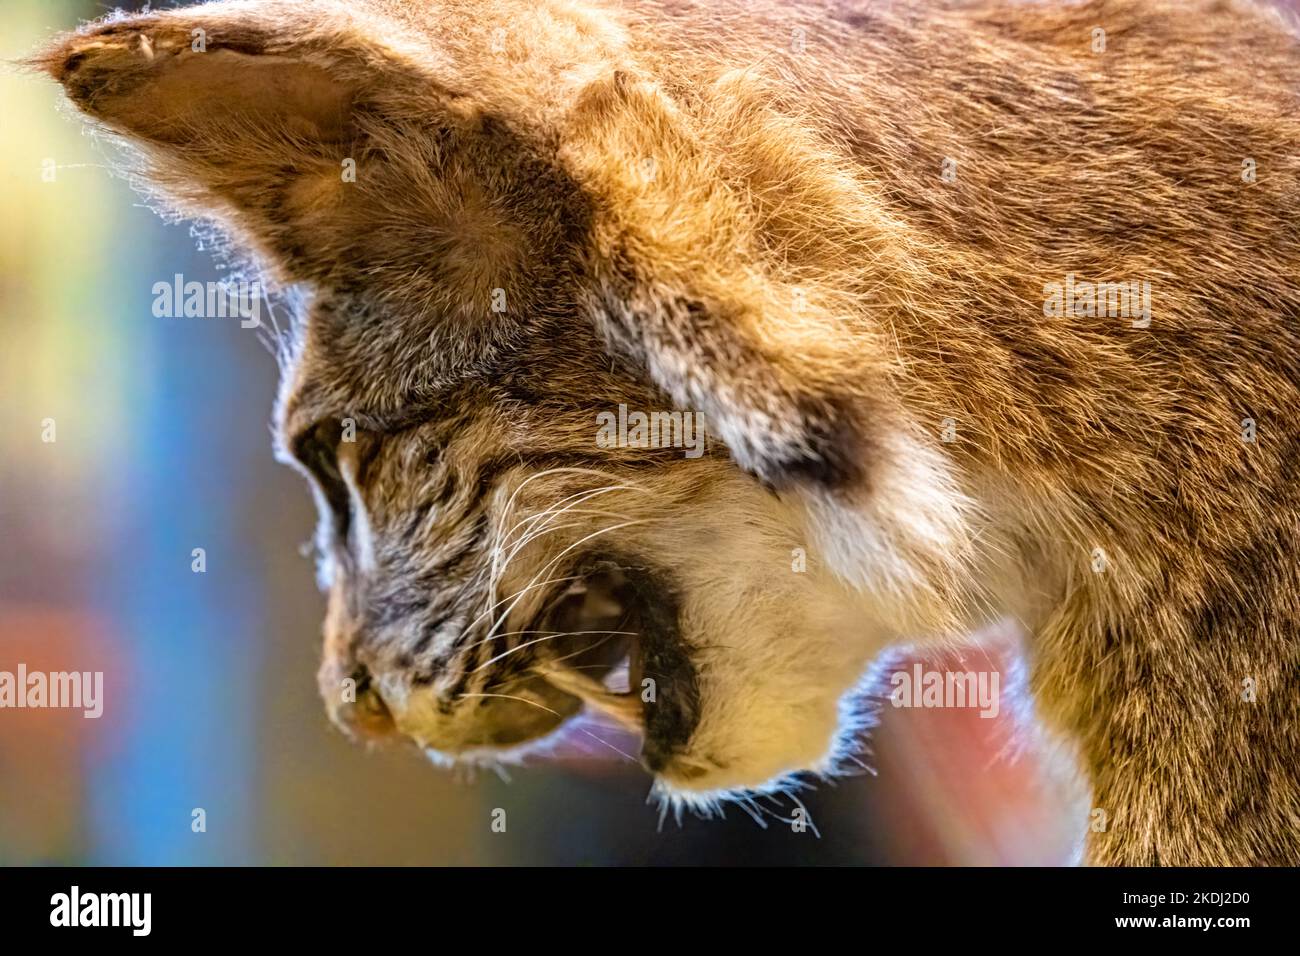 Close-up of taxidermy bobcat (lynx rufus) at the Tallulah Gorge State Park Visitor Center's Georgia wildlife display in Tallulah Falls, Georgia. (USA) Stock Photo